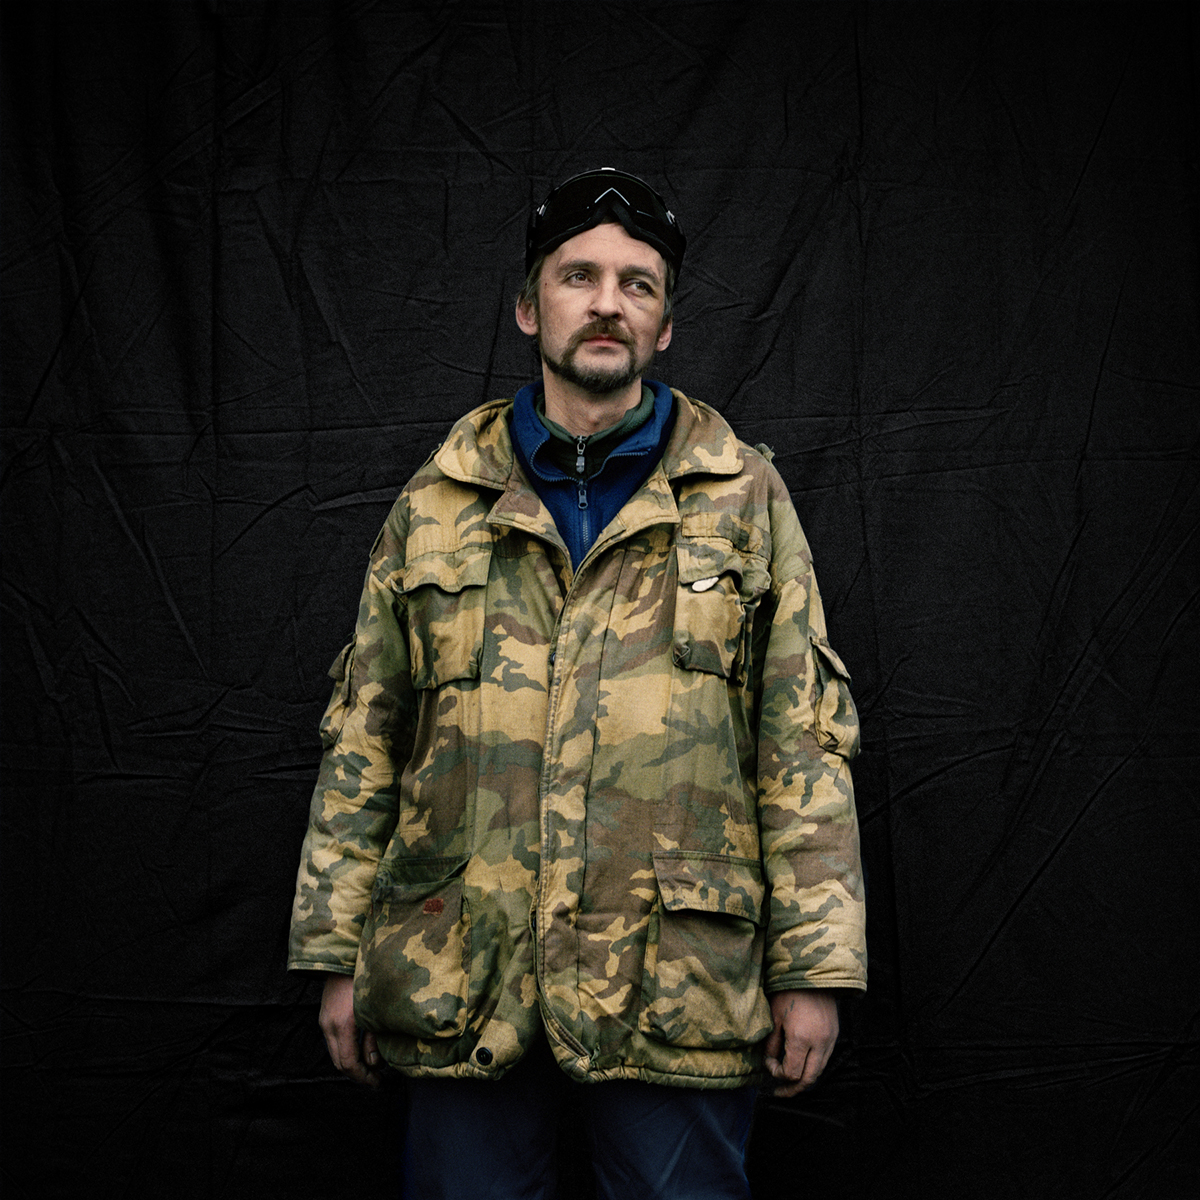 Anastasia Taylor-Lind photographed Oleg for her book "Maidan: Portraits from the Black Square"